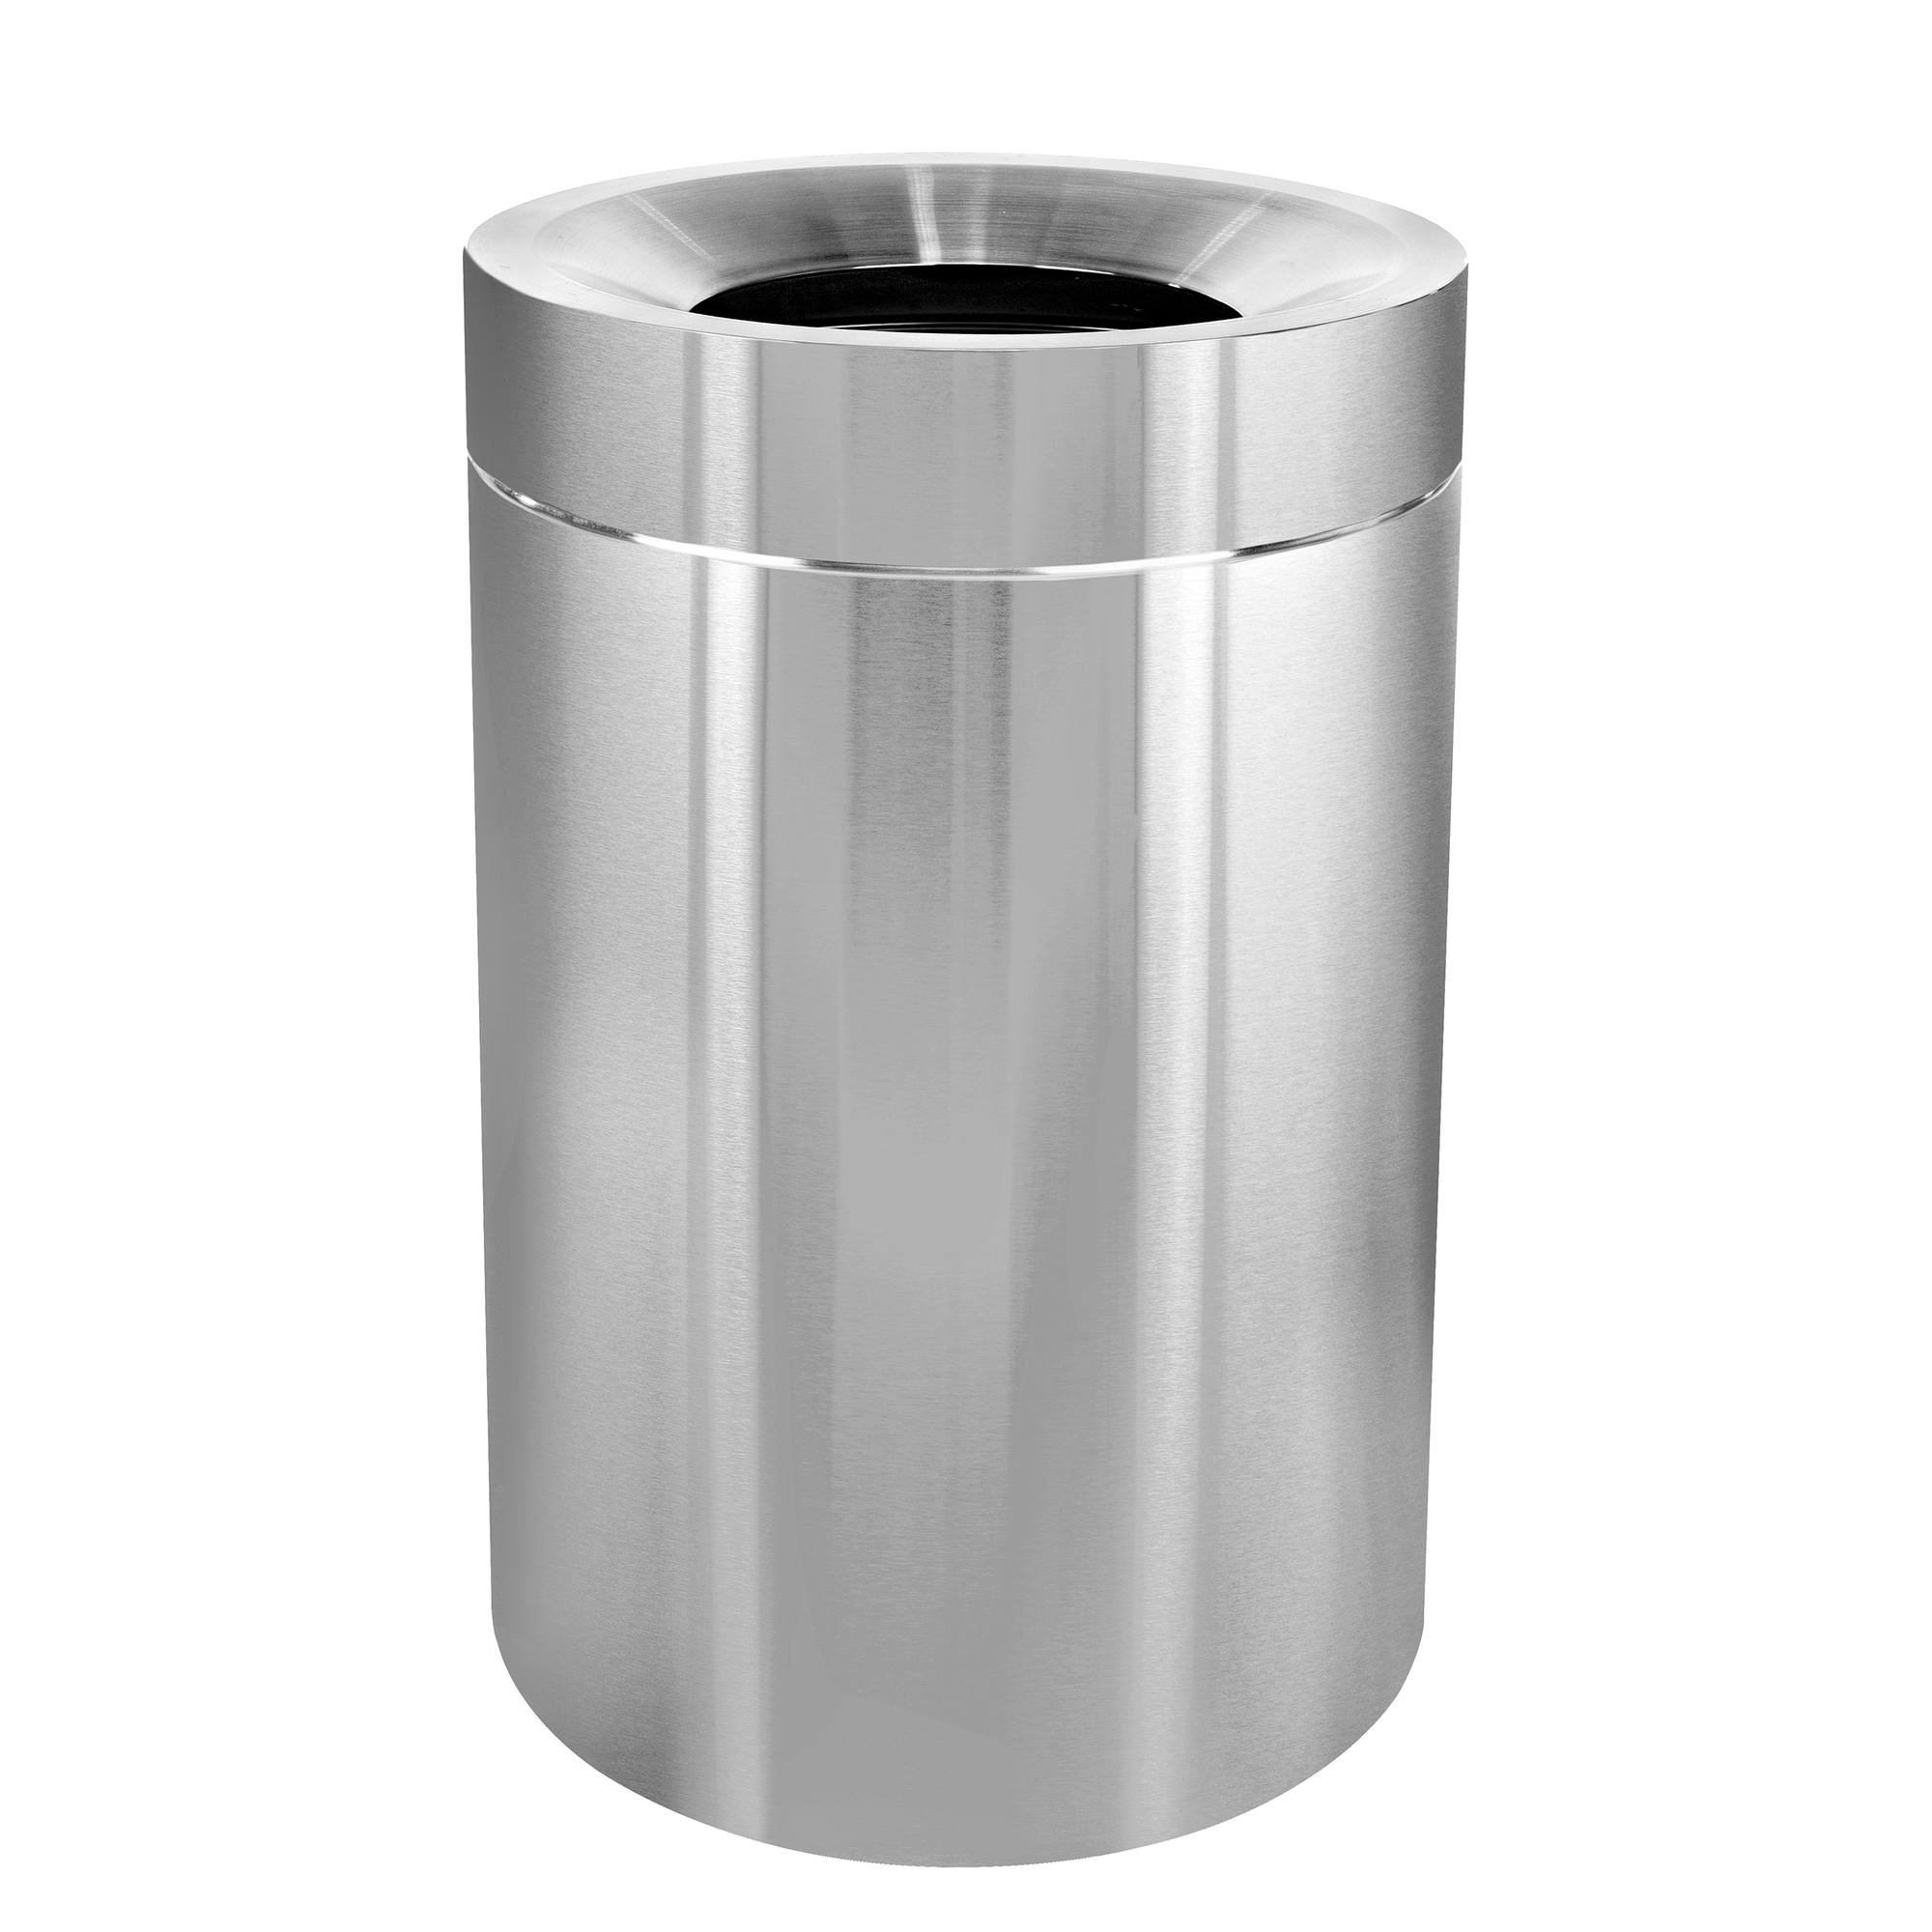 Alpine, 50-Gallon Stainless Steel Indoor Trash Can, Capacity 50 Gal, Model ALP475-50